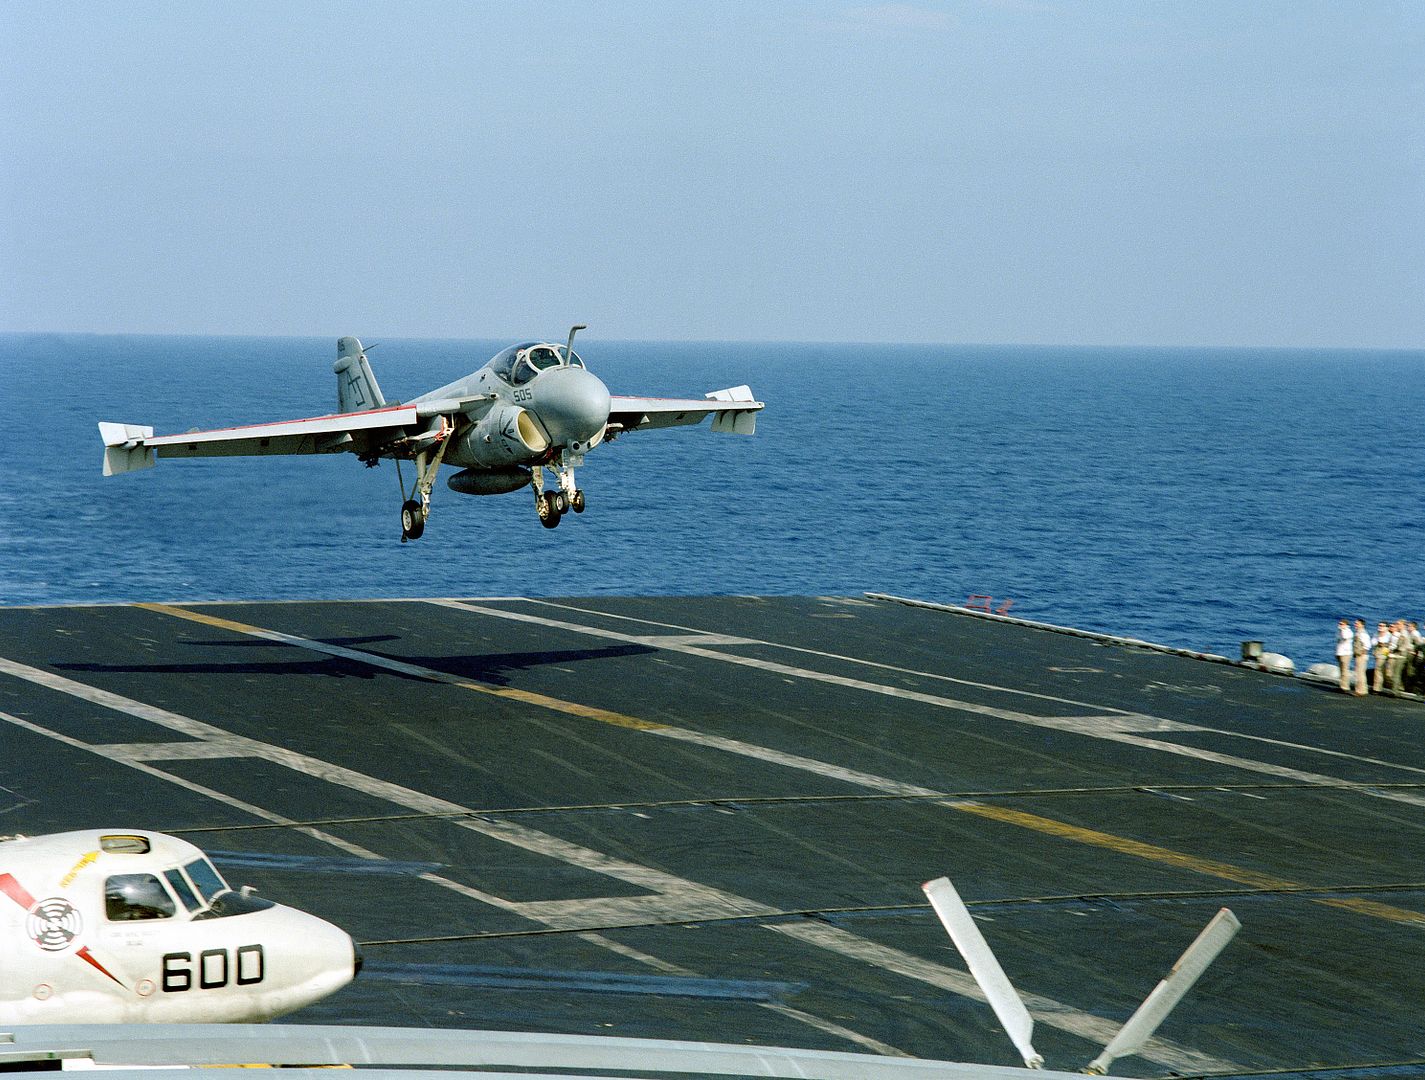 An Attack Squadron 65 A 6E Intruder Aircraft Comes In For An Arrested Landing Aboard The Nuclear Powered Aircraft Carrier USS THEODORE ROOSEVELT